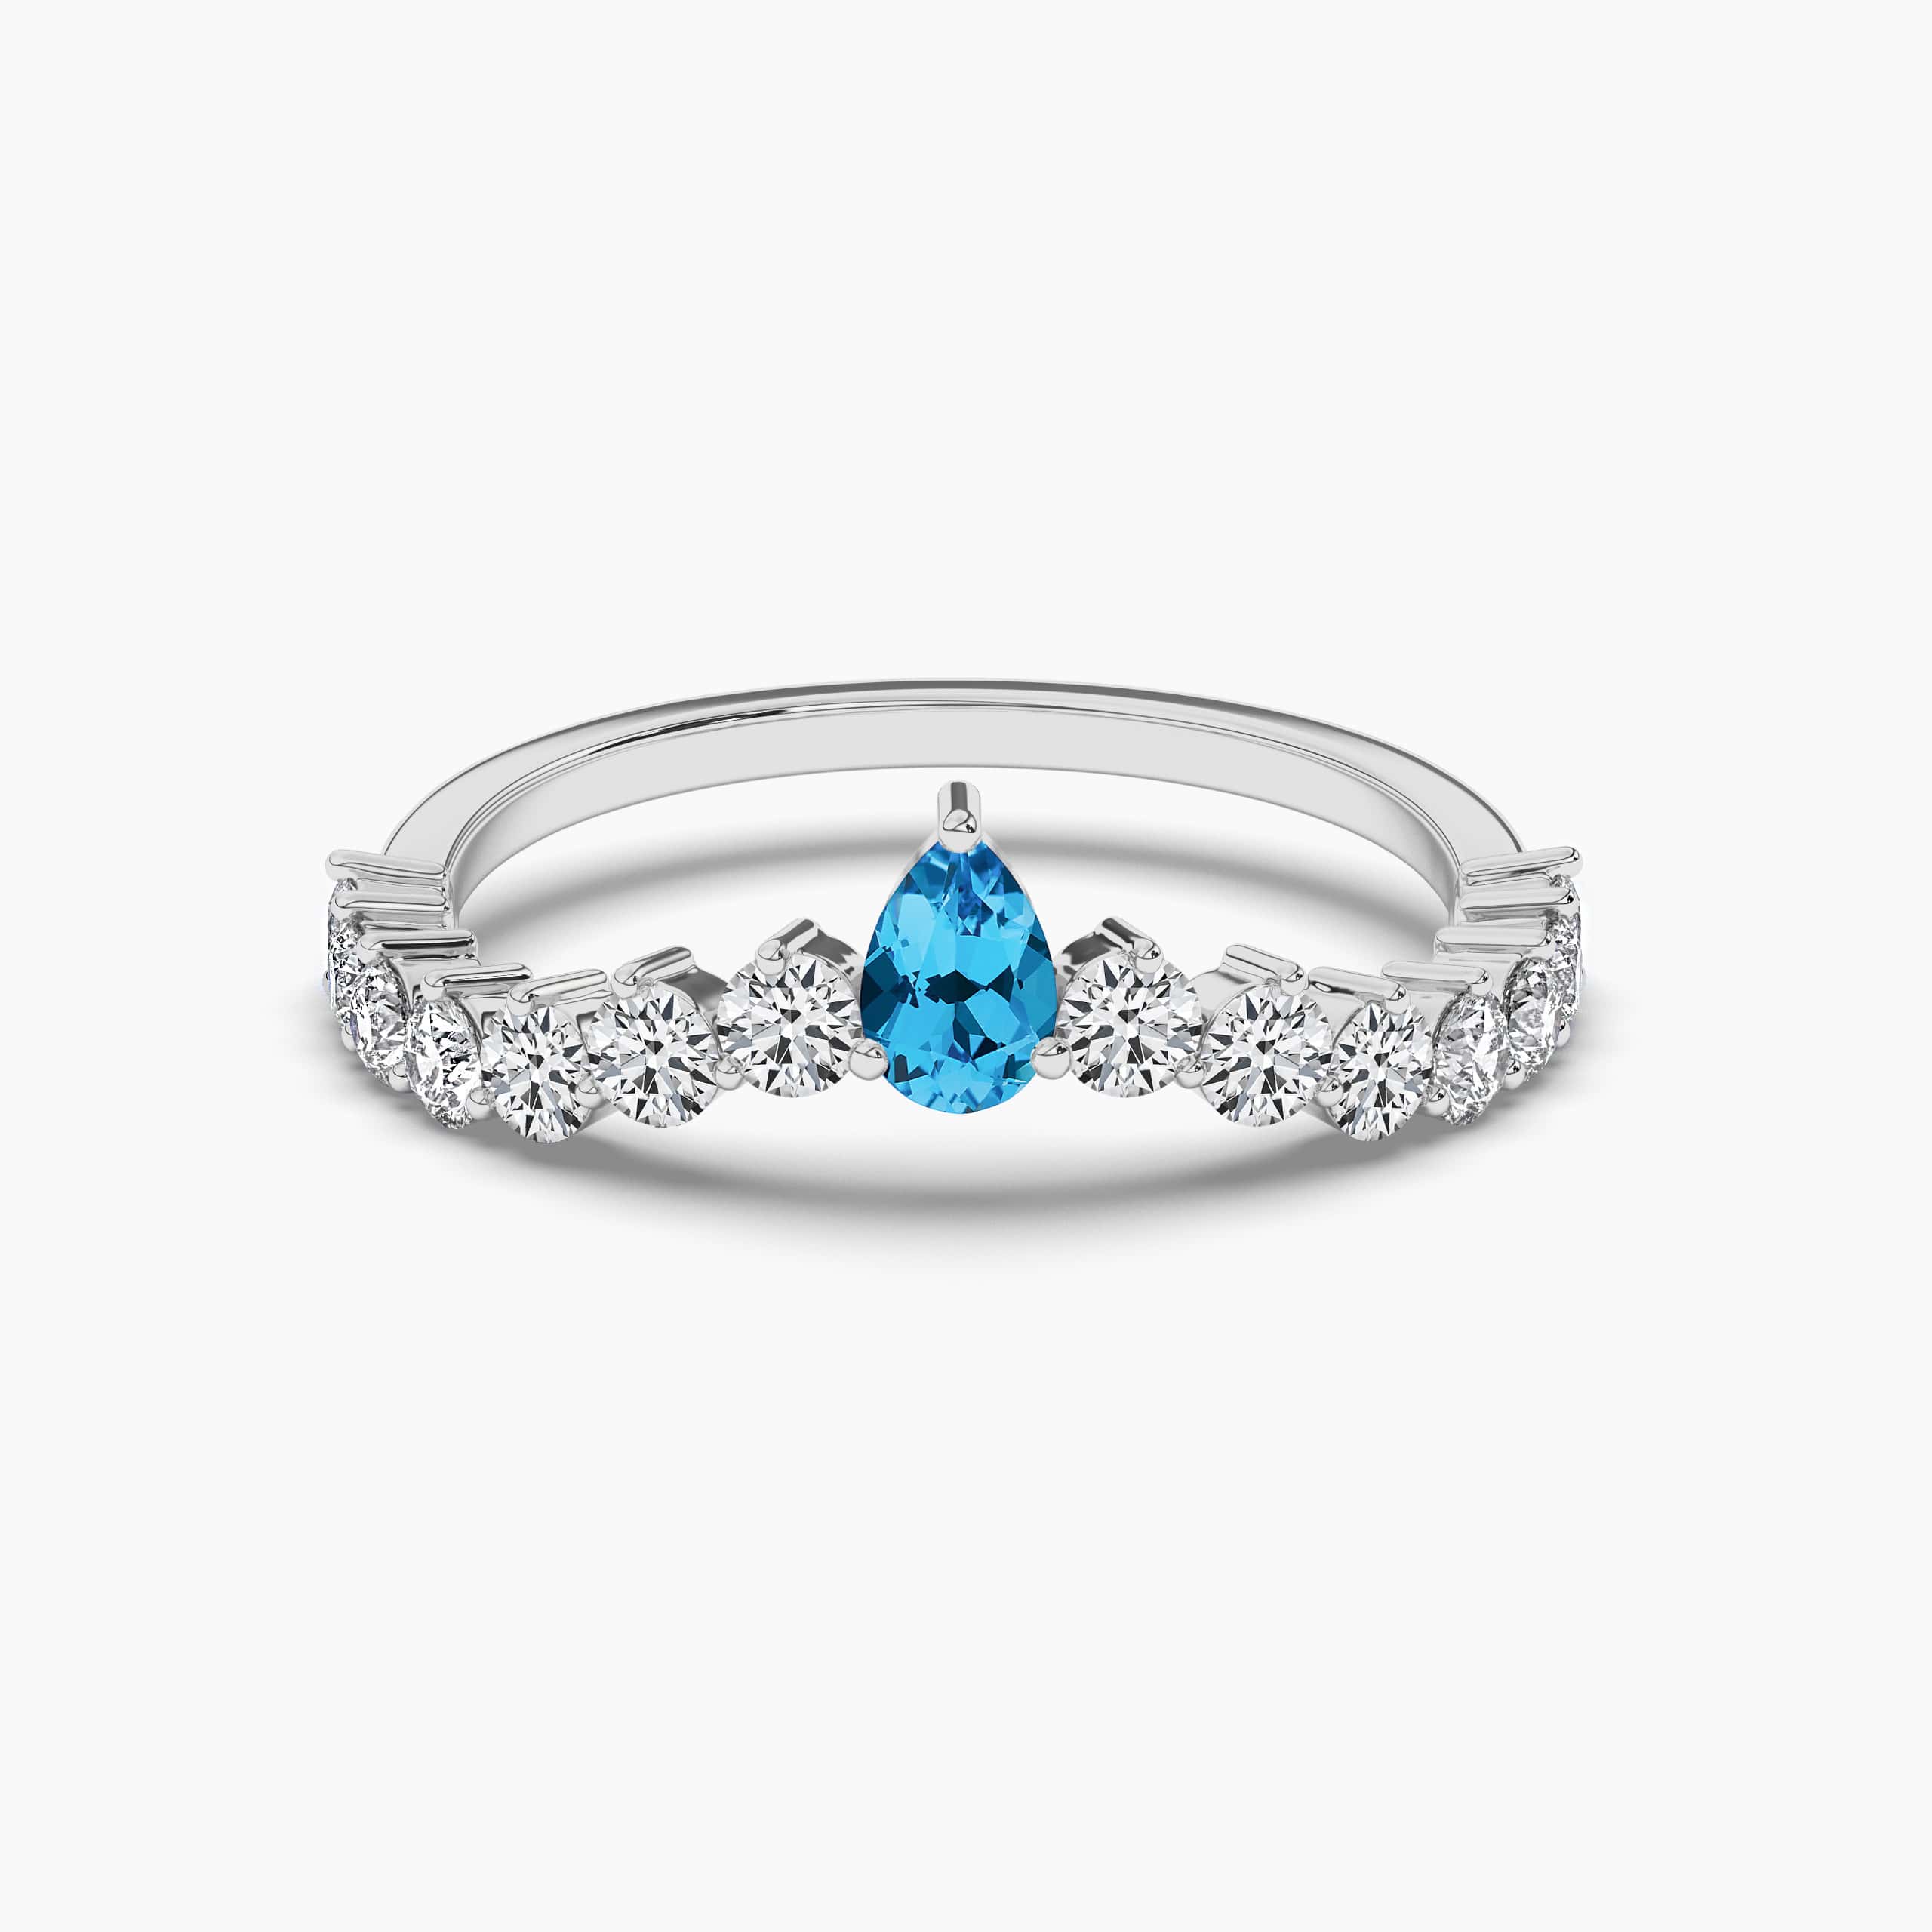 White Gold Pear-Shaped Blue Topaz Ring